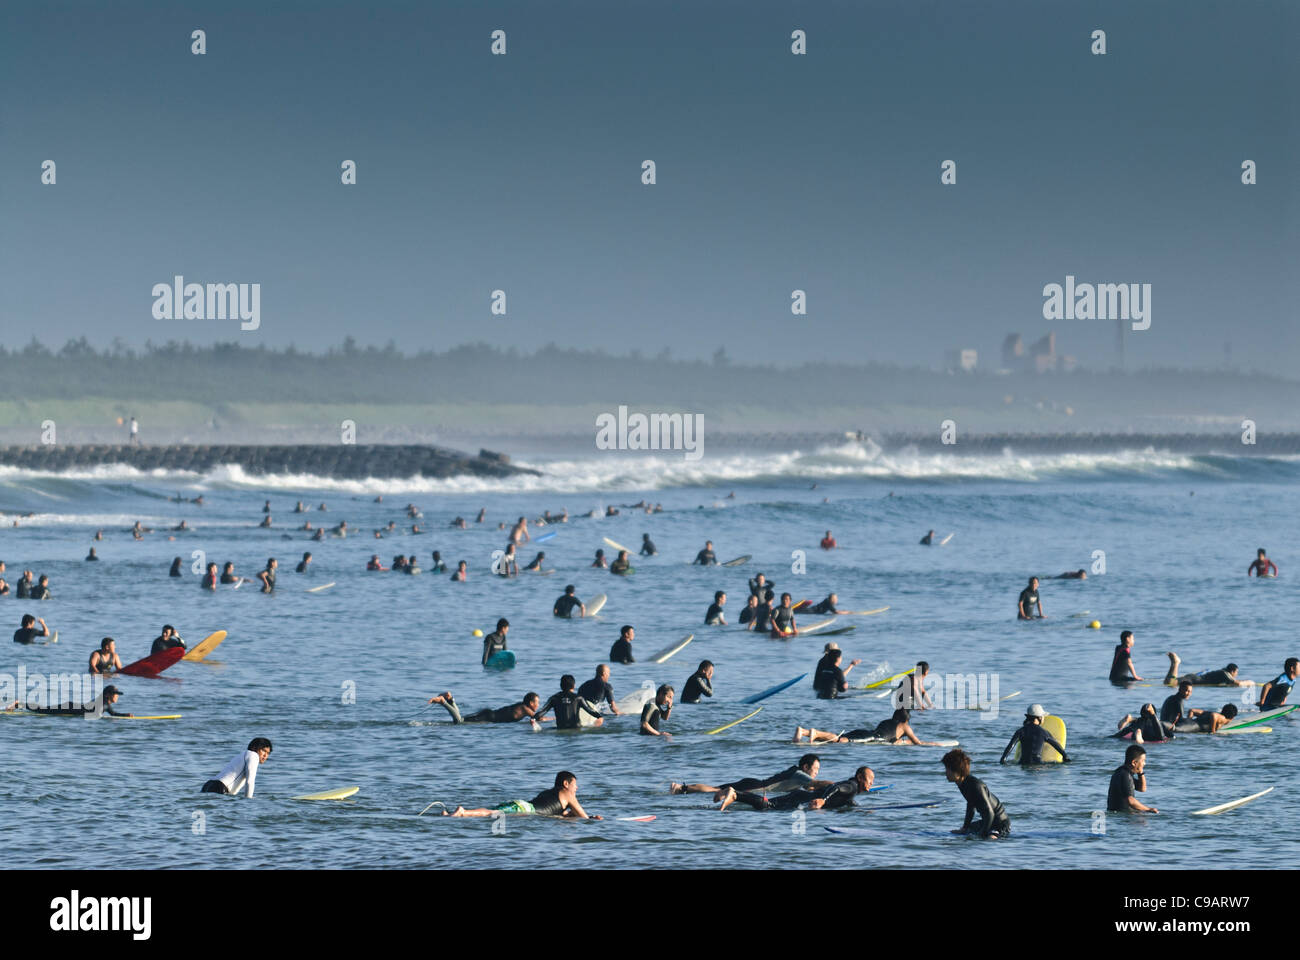 Taito beach, Chiba, Japan. Taito beach is one of Japan's best-known surfing spots  nearby Tokyo. Stock Photo